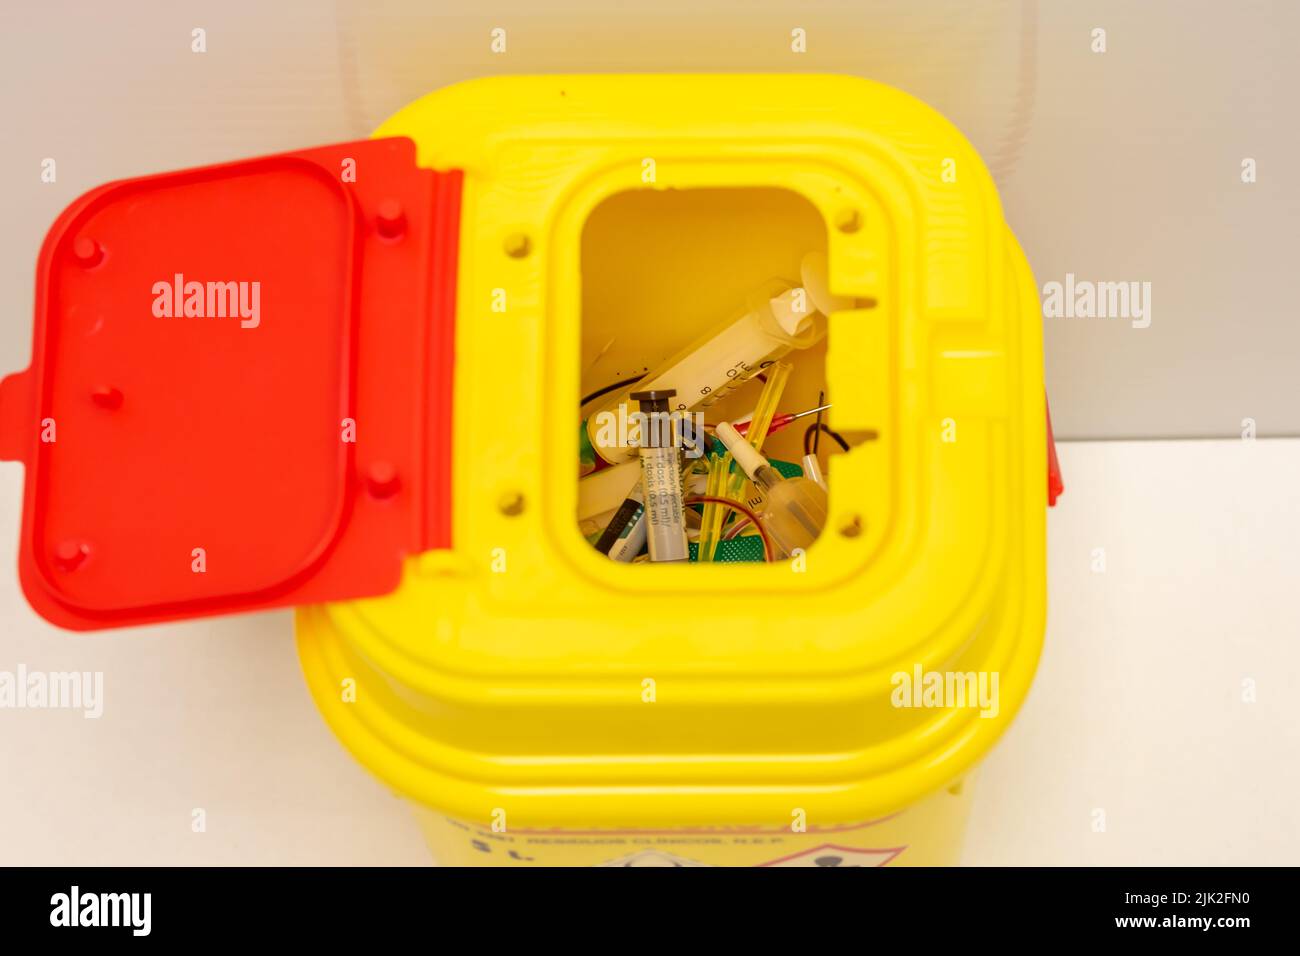 https://c8.alamy.com/comp/2JK2FN0/yellow-container-for-hazardous-hospital-biological-waste-that-poses-a-risk-to-human-health-and-the-environment-2JK2FN0.jpg